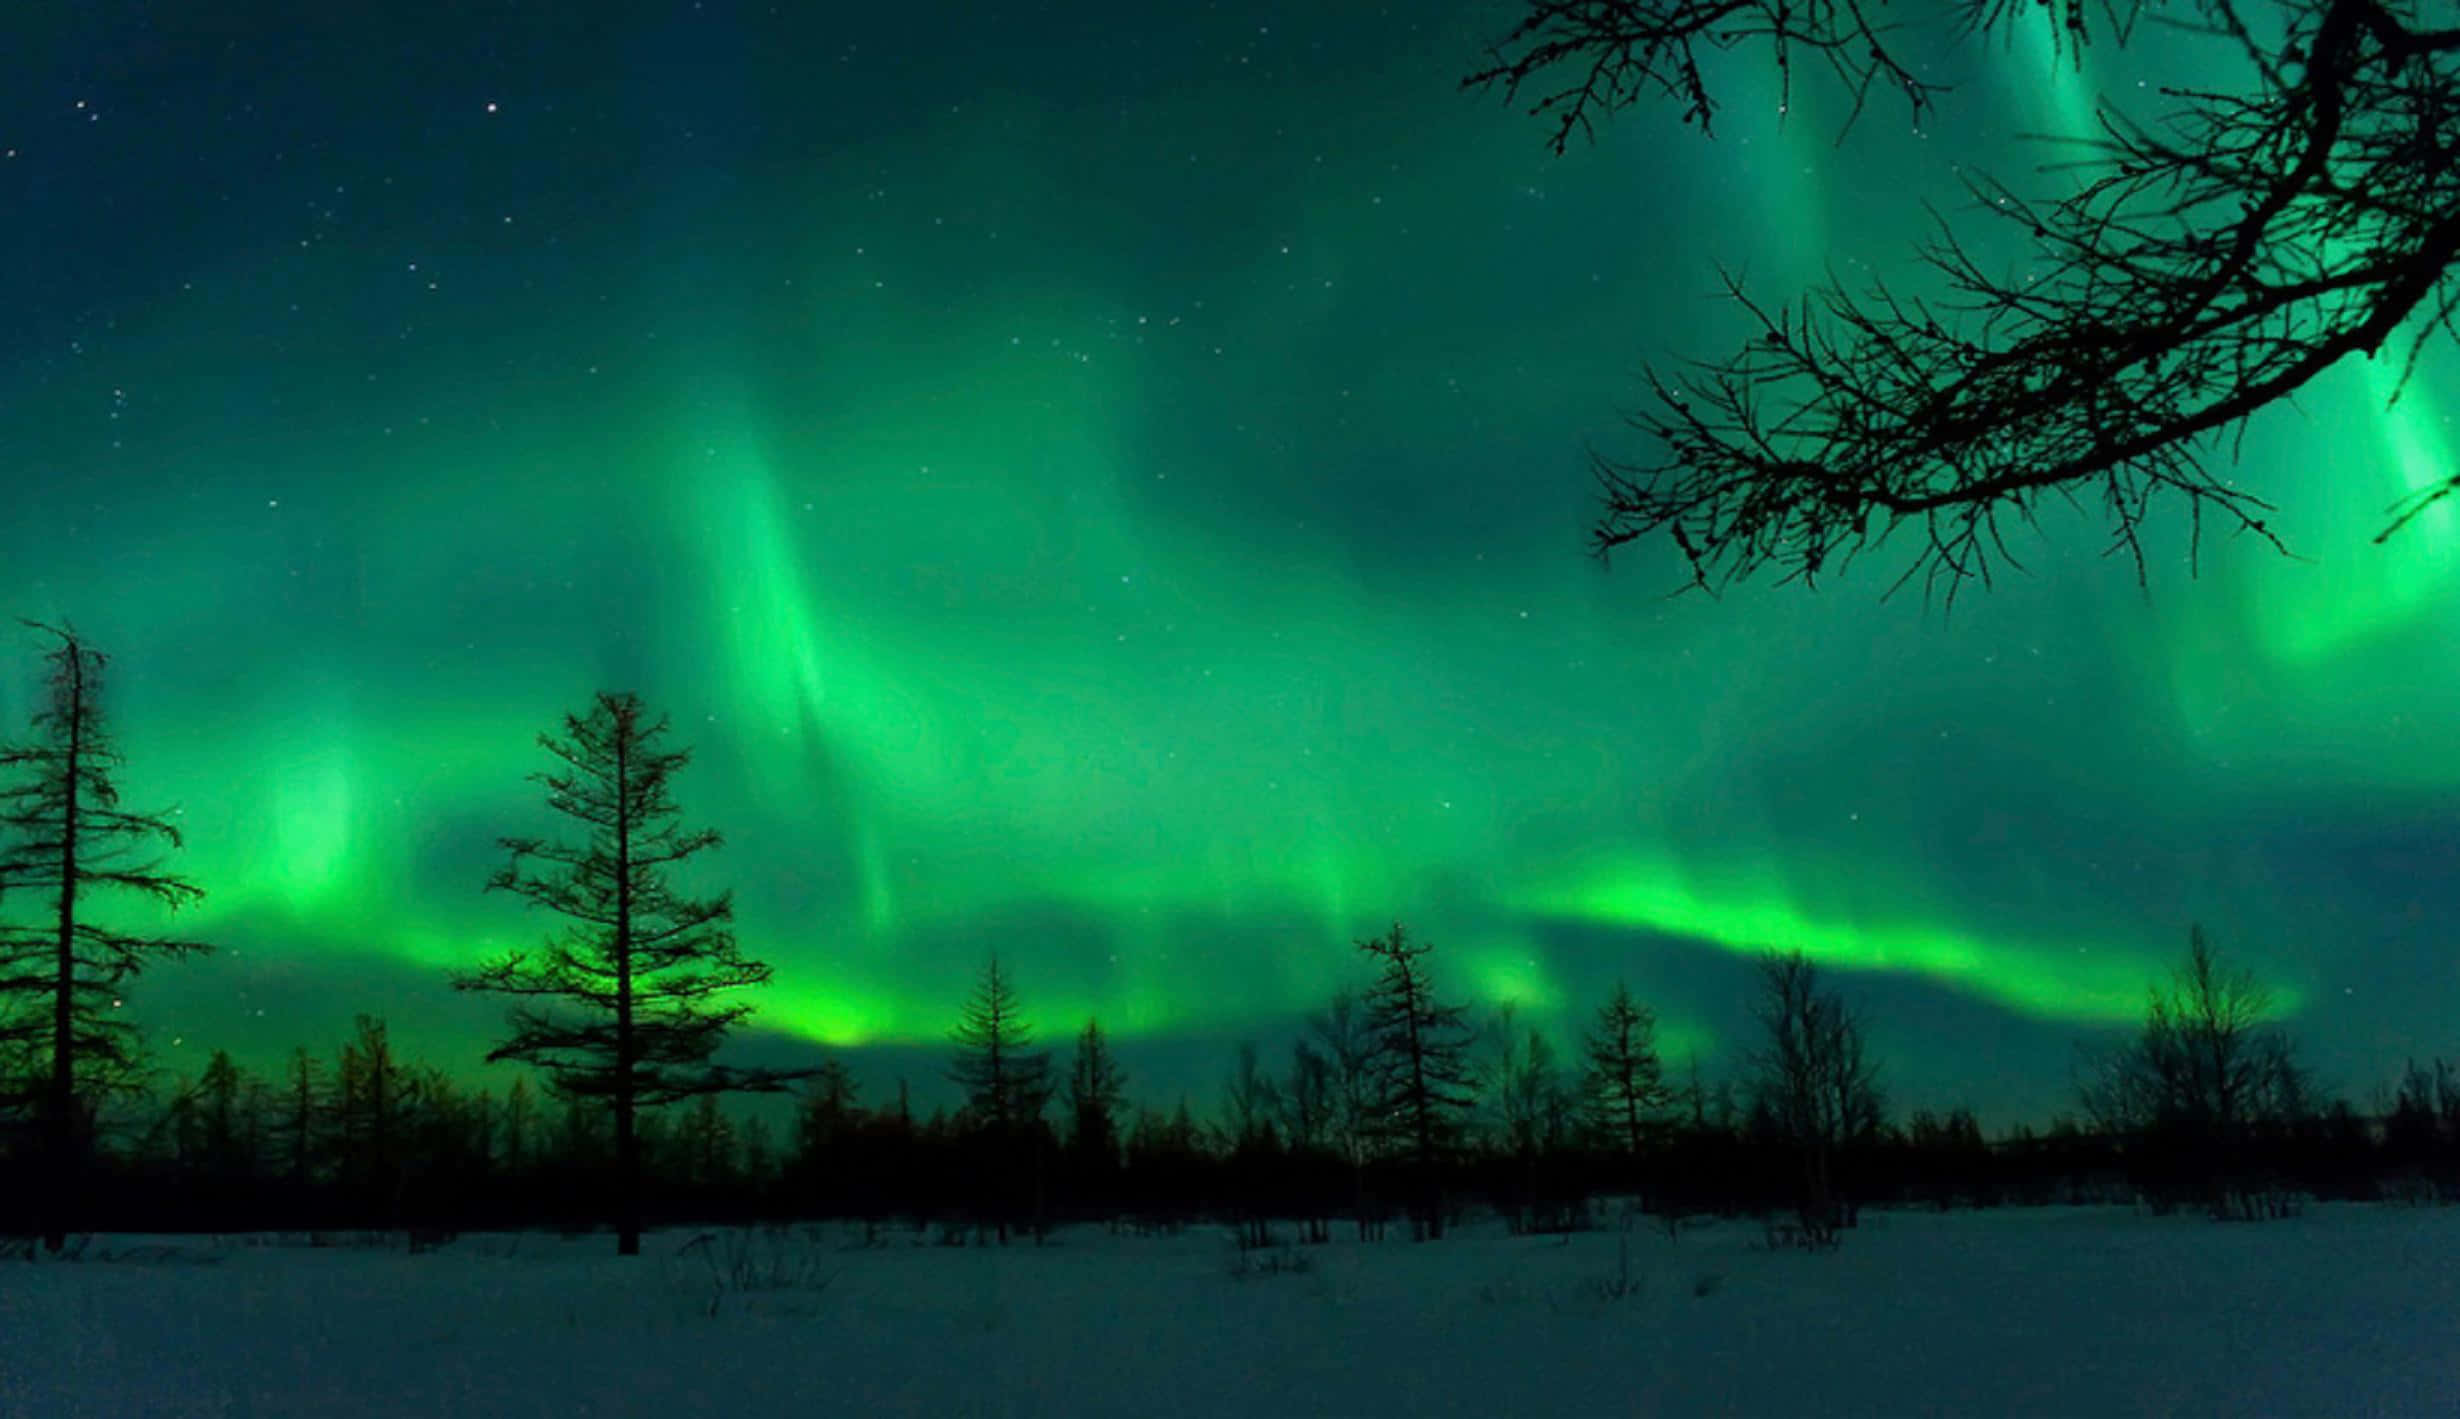 Enjoy the beauty of the night sky with sparkling Northern Lights